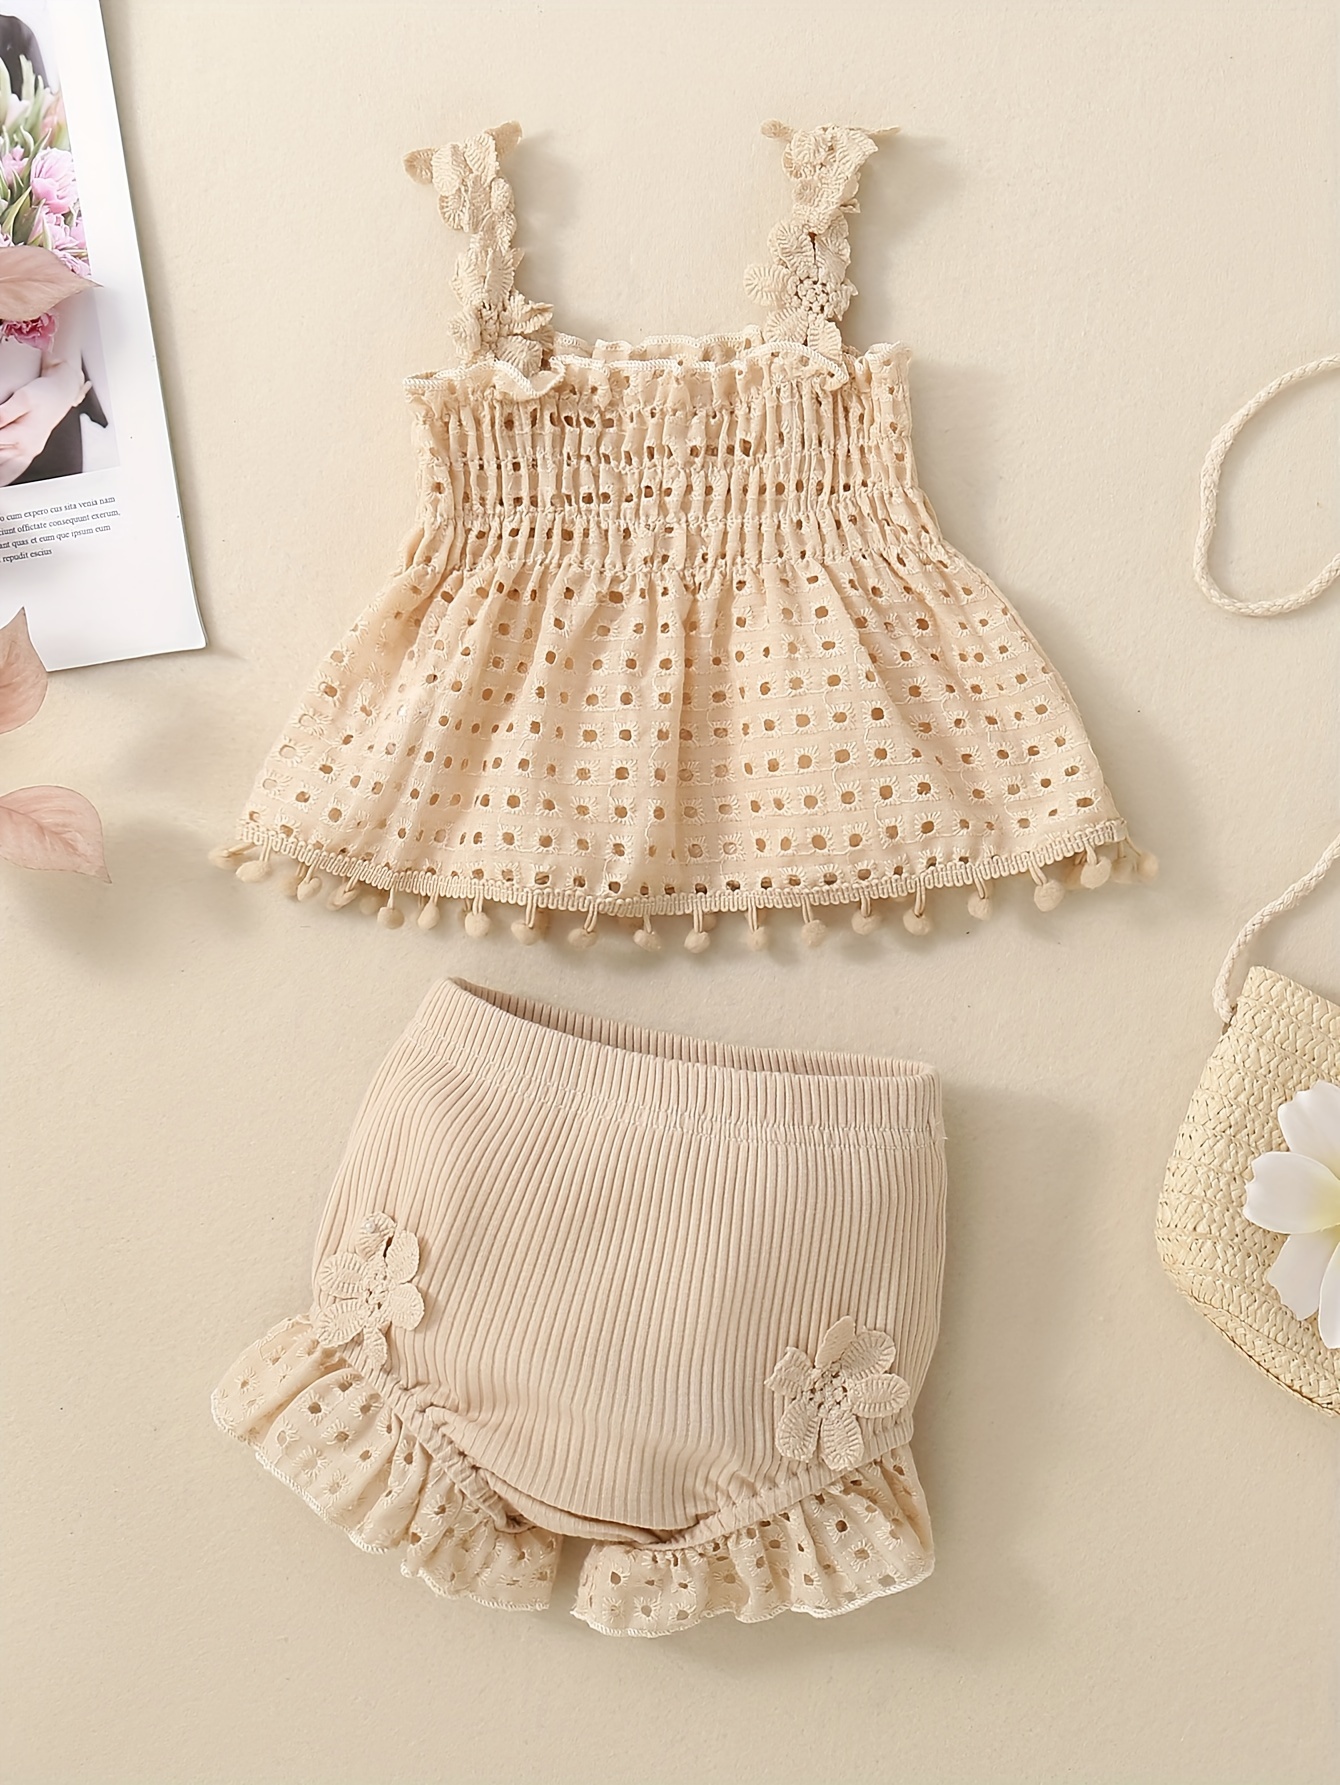 Stylish Summer Outfit with Lace Bloomer Shorts